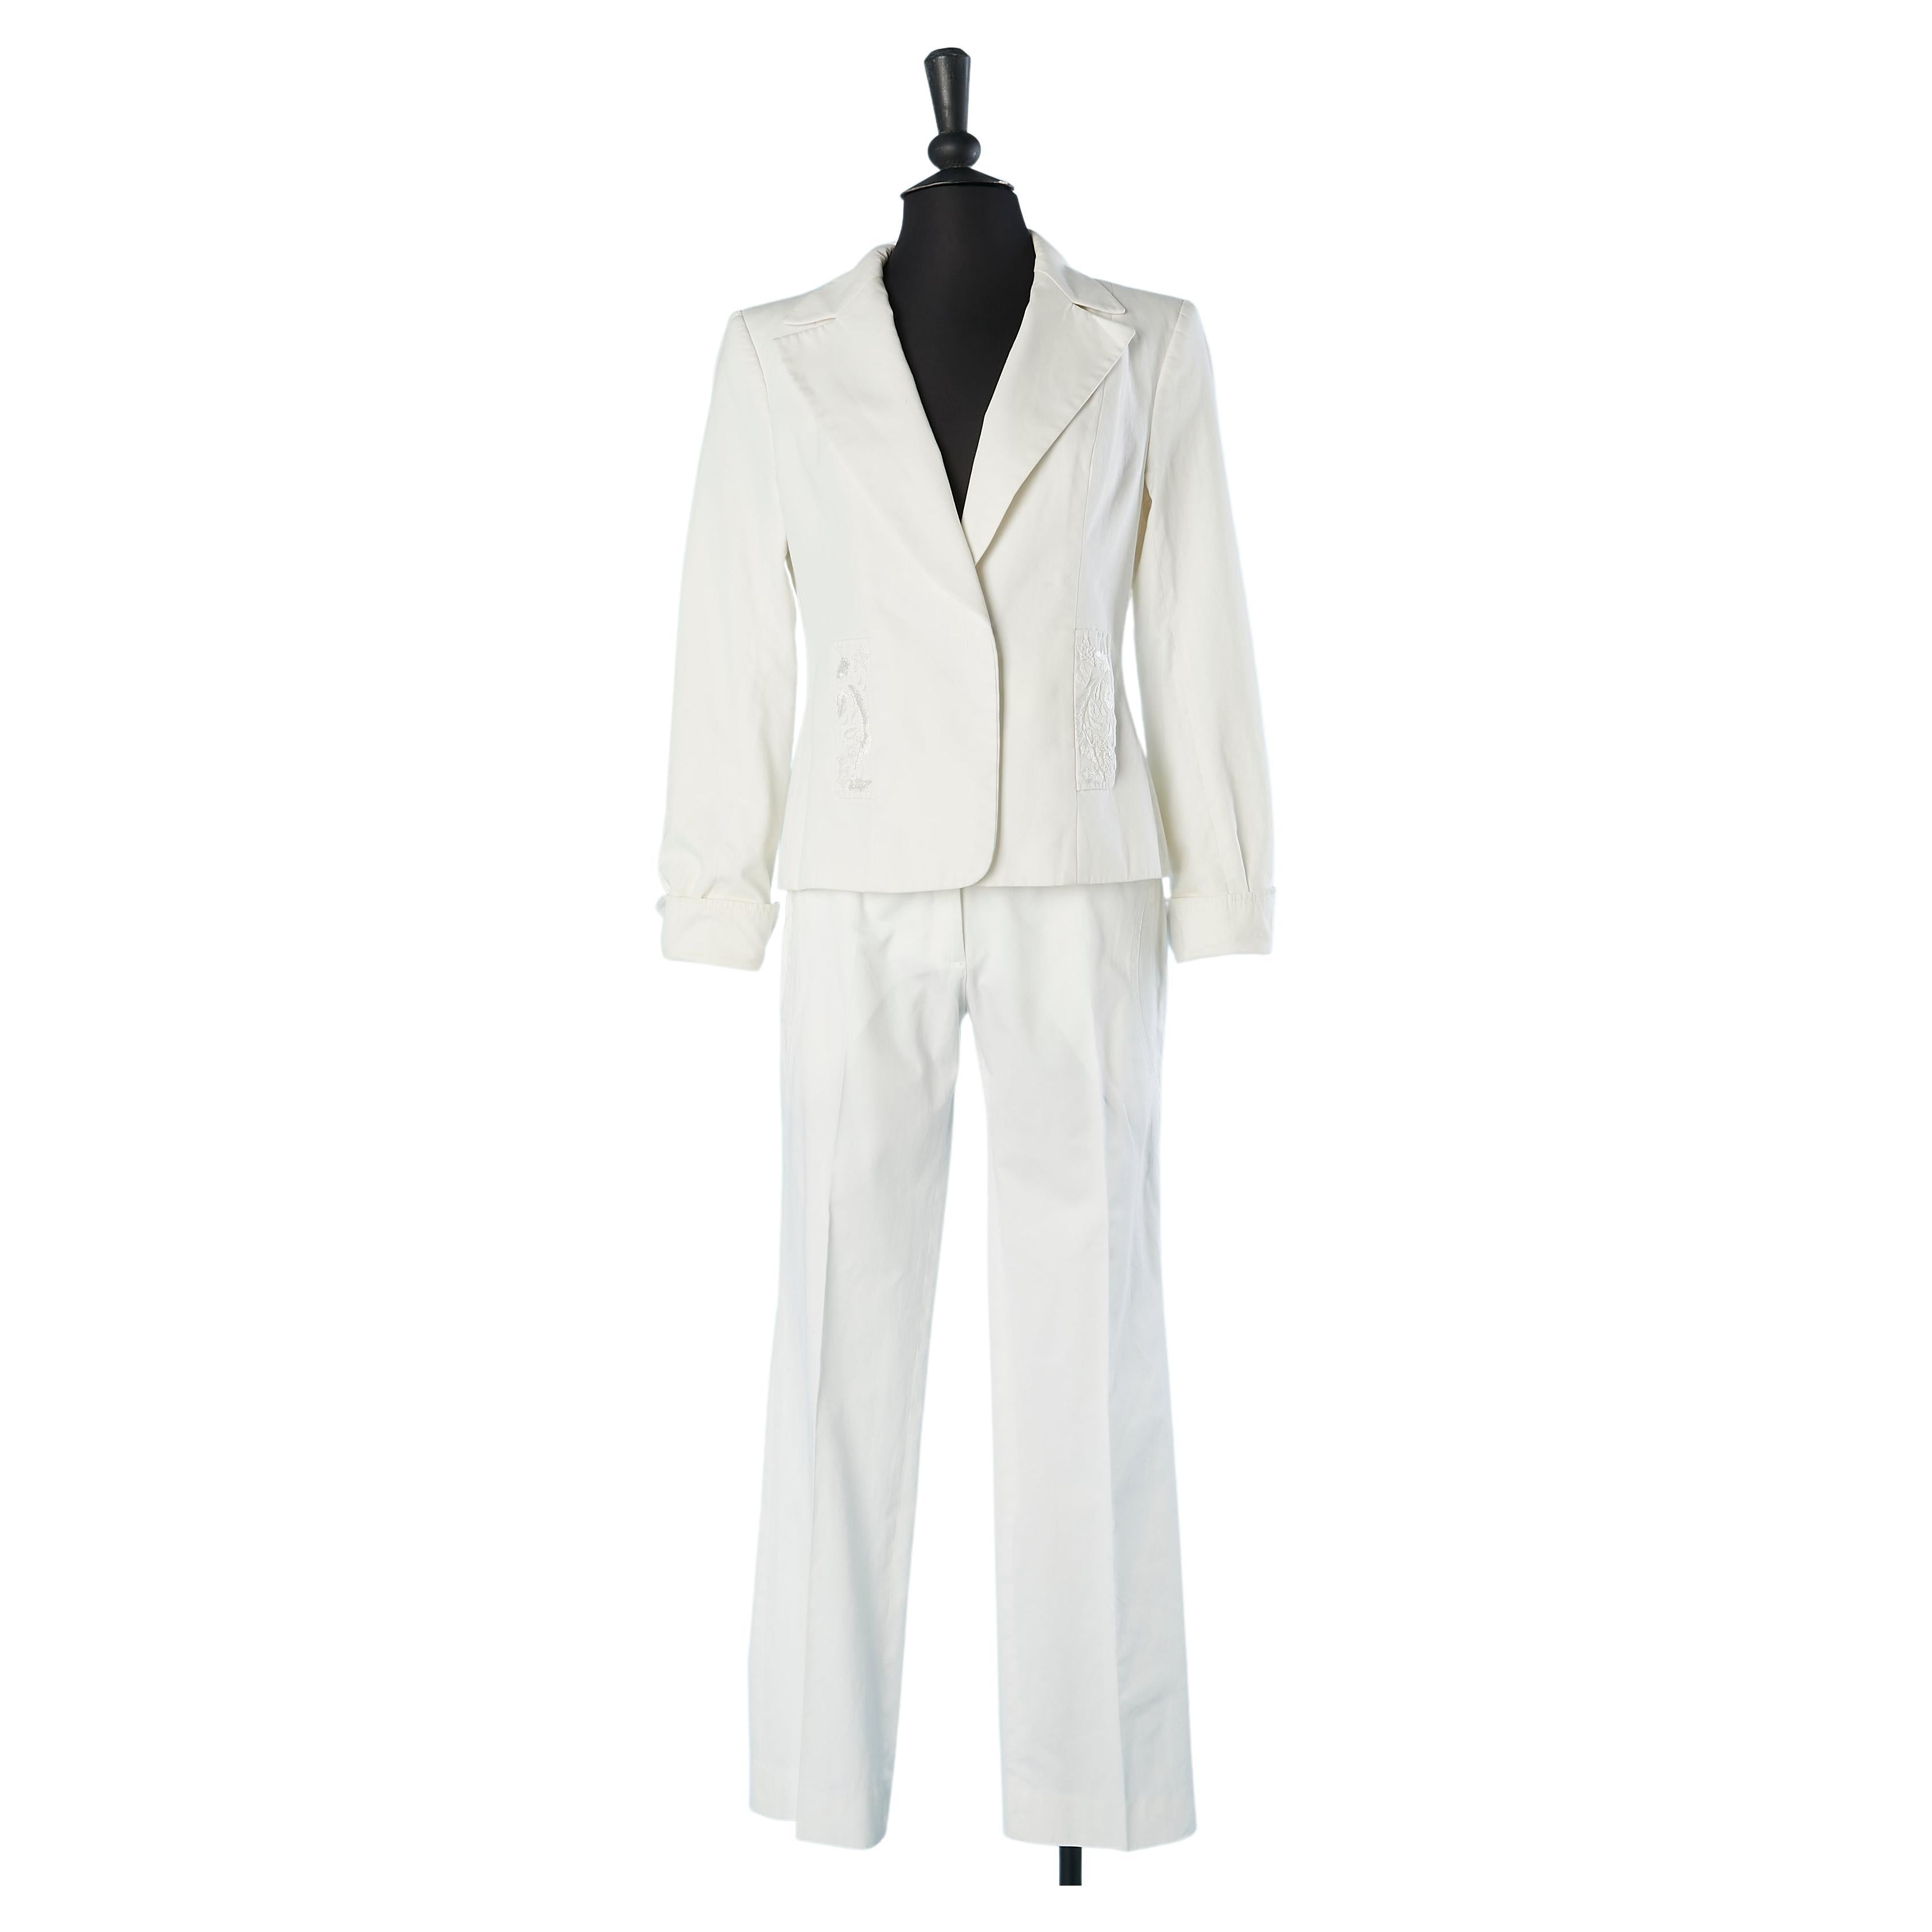 Trouser-suit in white cotton with embroideries on pockets Christian Lacroix